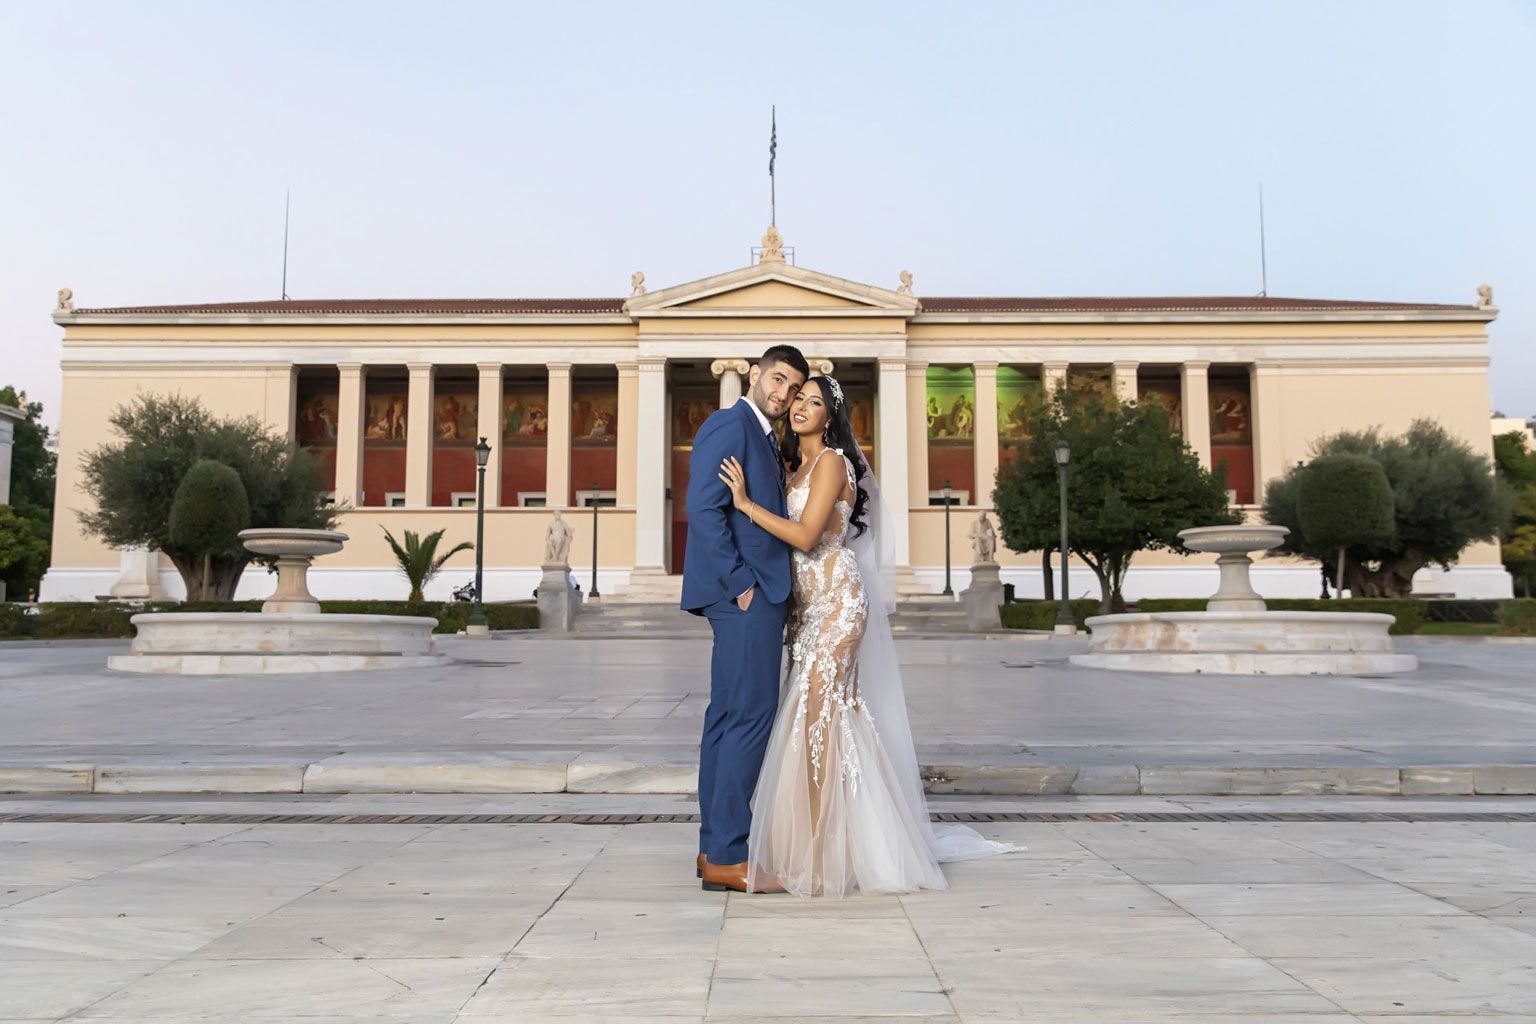 Max & Rotem Wedding in Athens